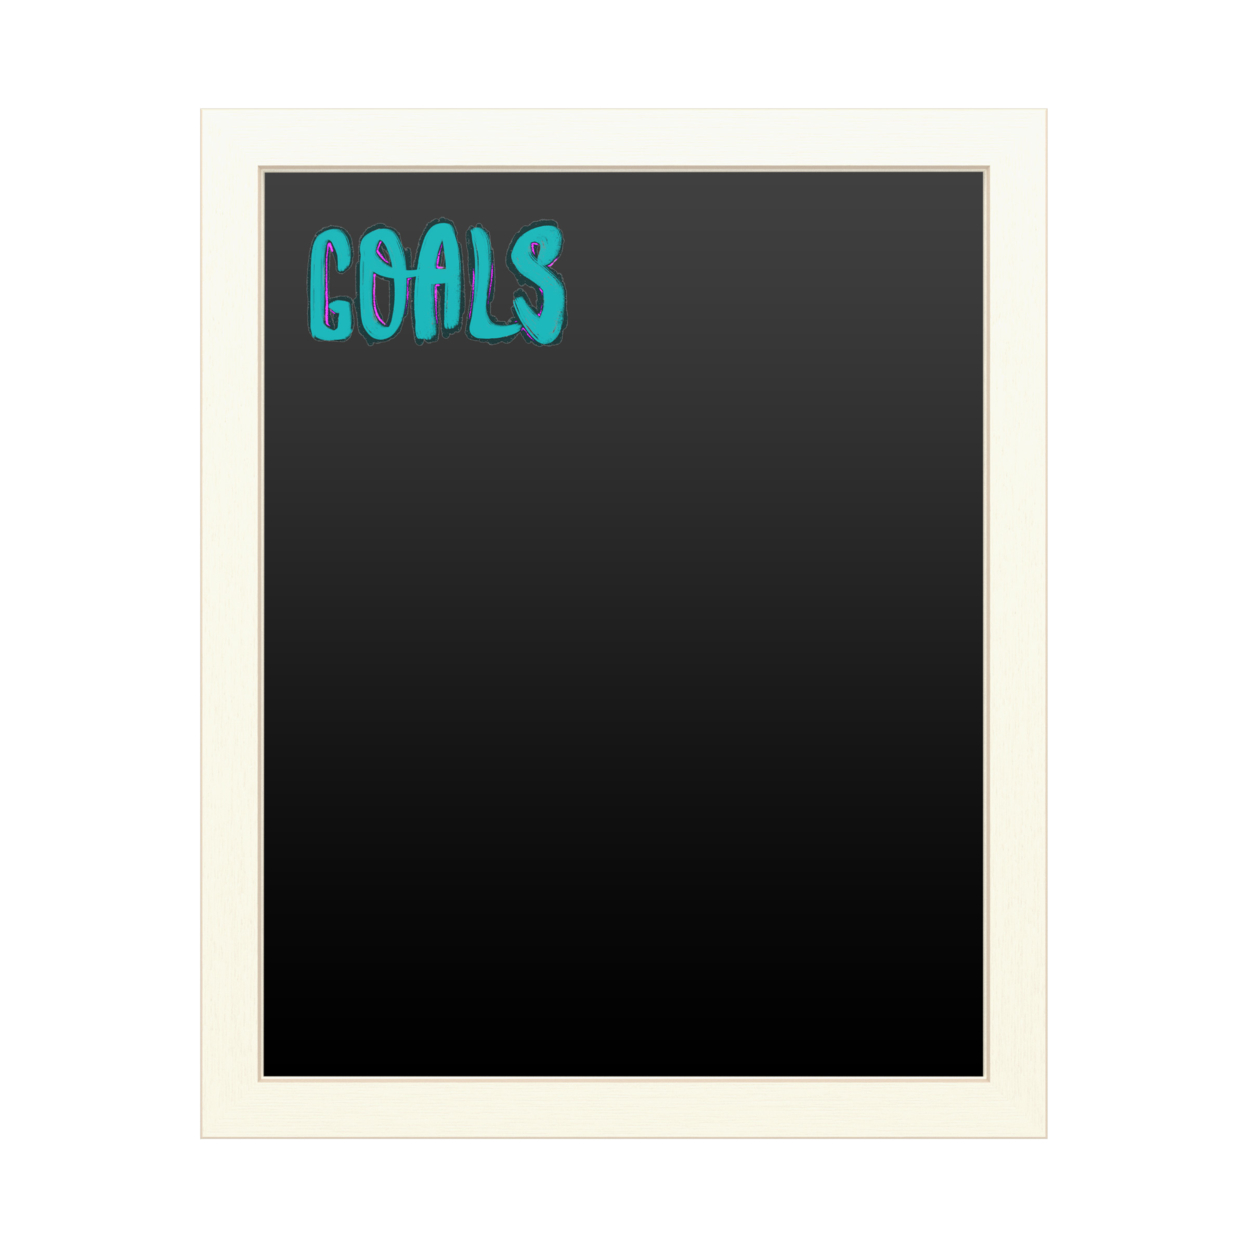 16 X 20 Chalk Board With Printed Artwork - Goals Script White Board - Ready To Hang Chalkboard